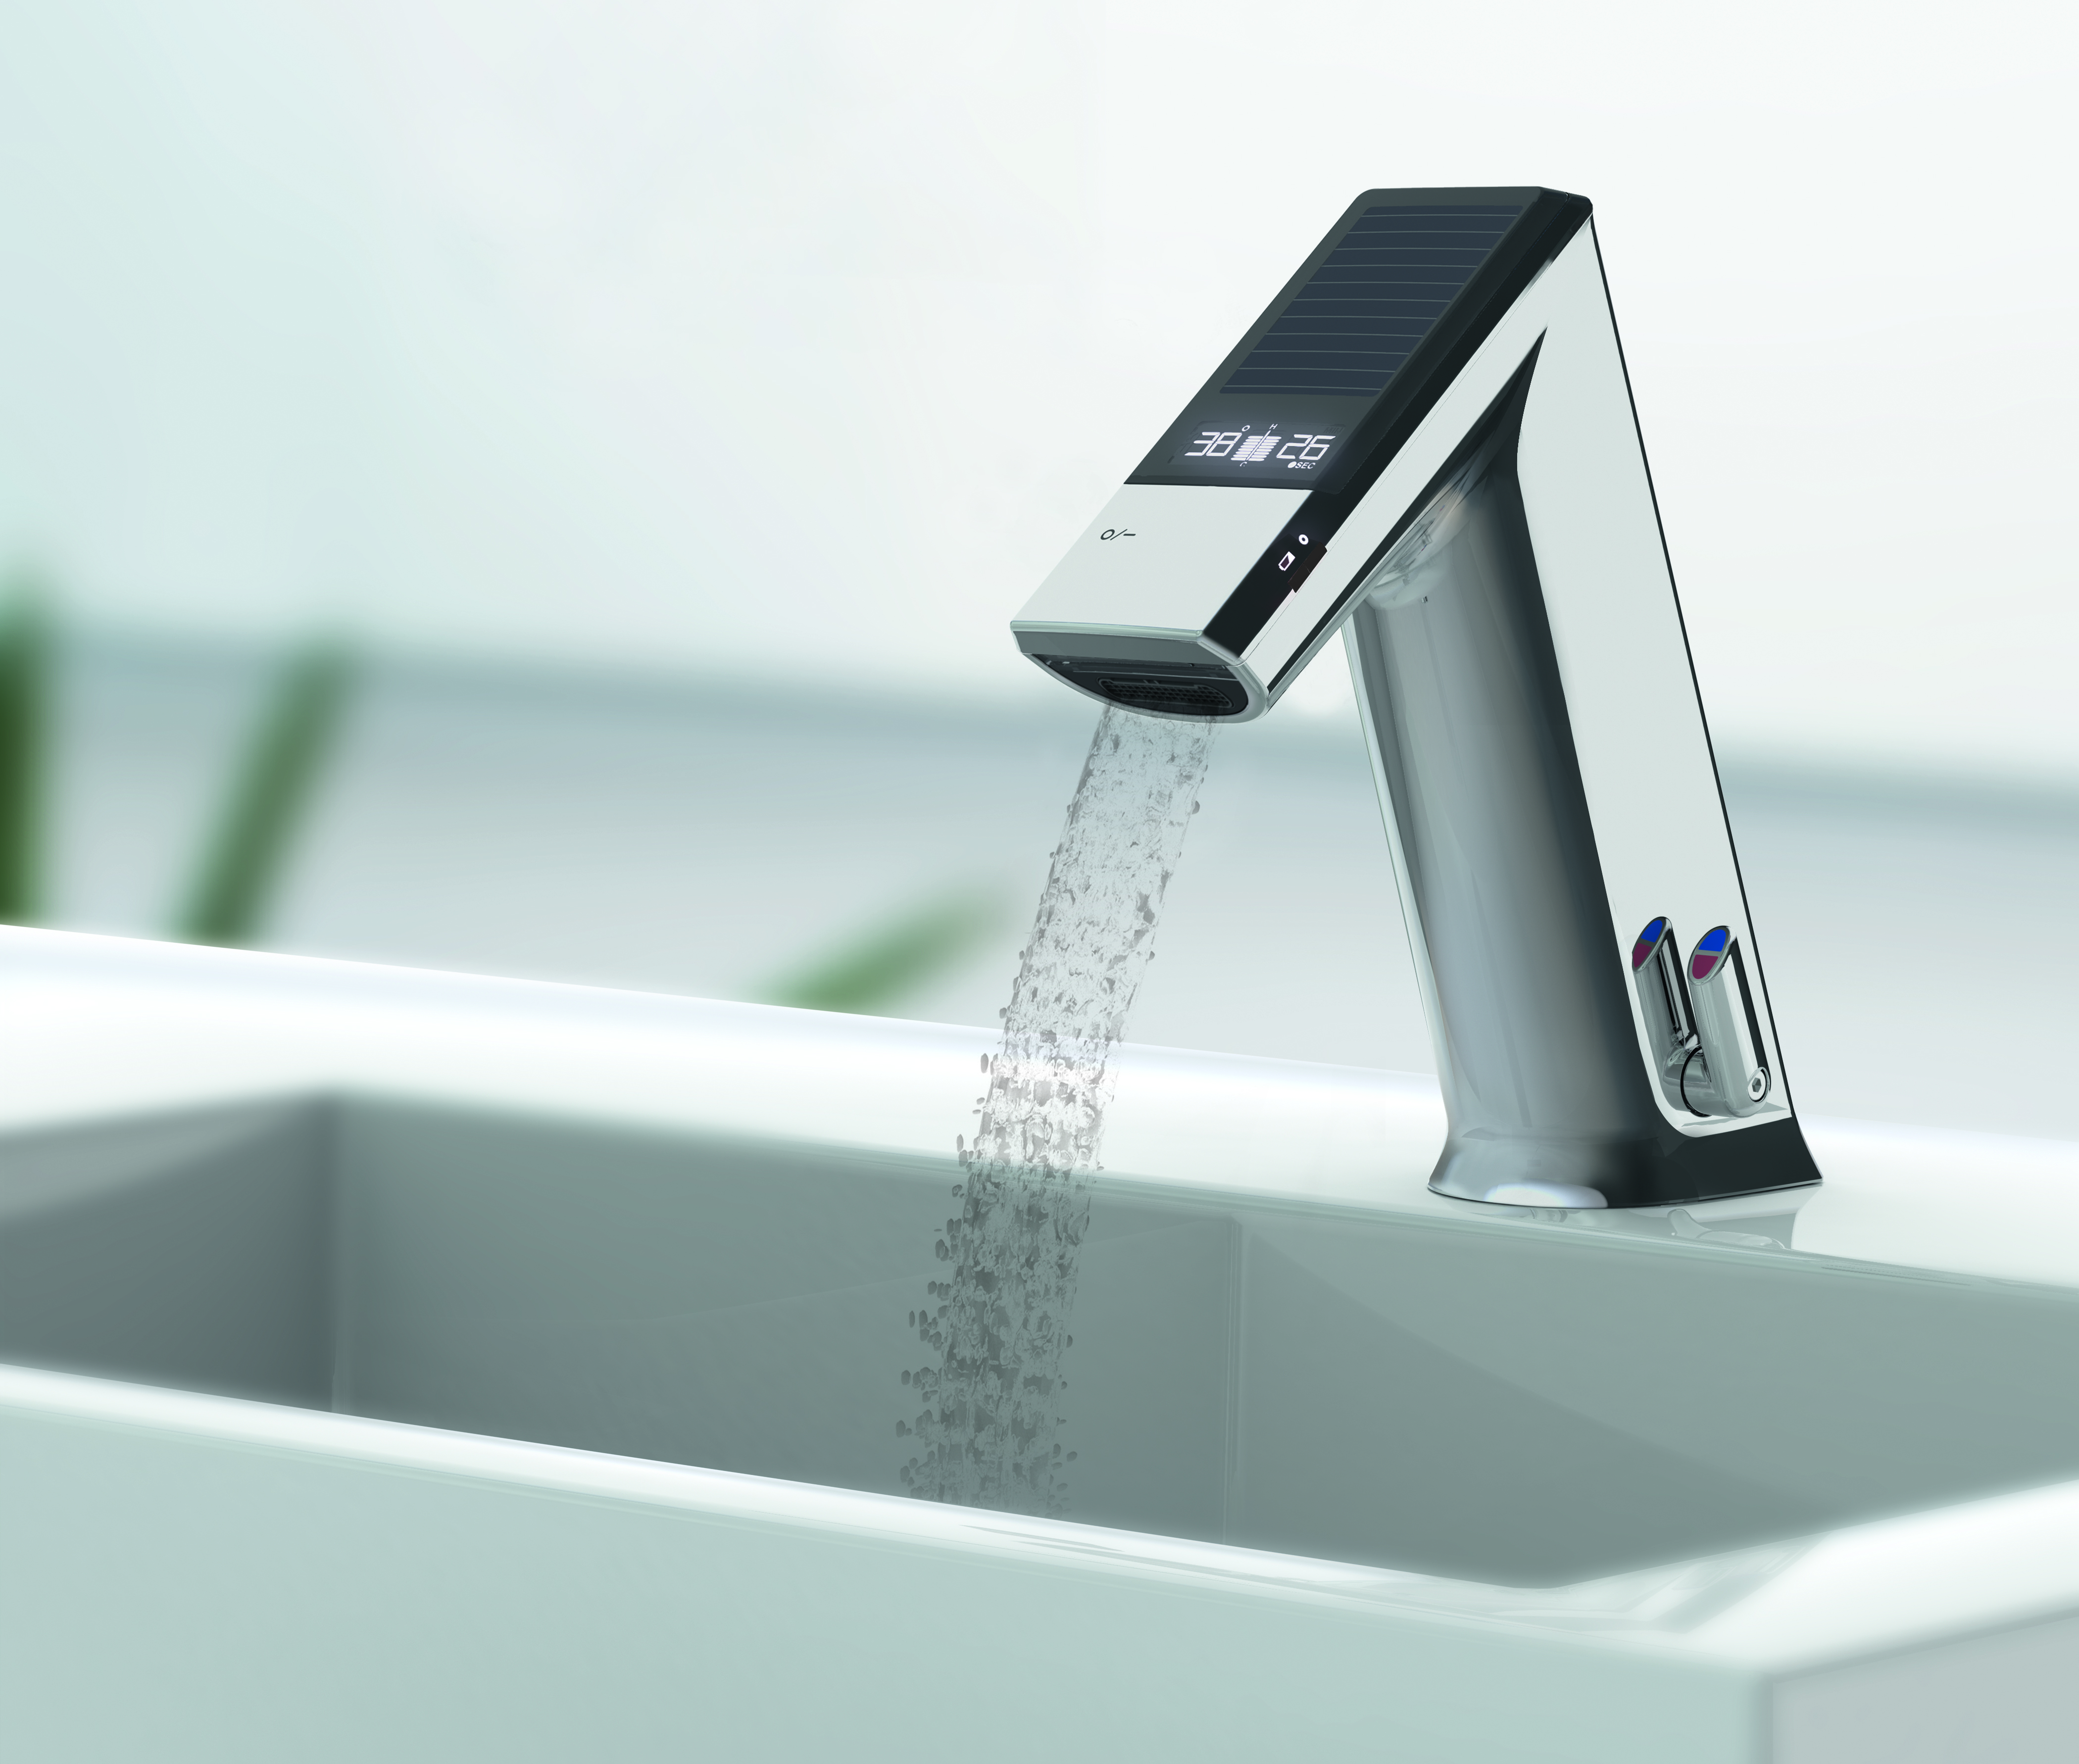 With a smooth internal body and being anti-bacterial, Conti's new Ultra range has been designed to address all the key arguments against the use of sensor tap technology